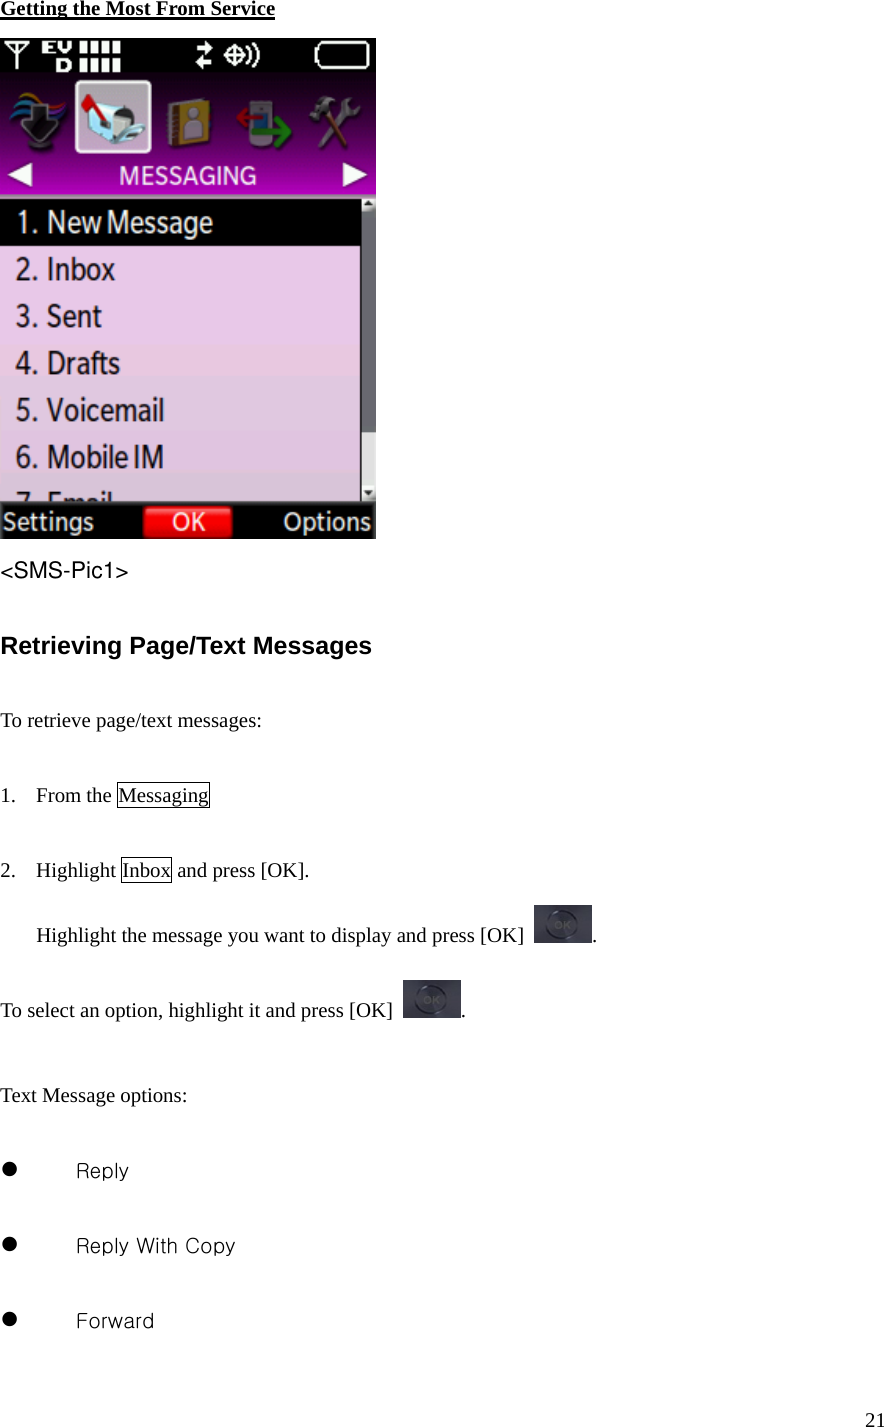 21 Getting the Most From Service  &lt;SMS-Pic1&gt;  Retrieving Page/Text Messages  To retrieve page/text messages:  1. From the Messaging    2. Highlight Inbox and press [OK]. Highlight the message you want to display and press [OK]  .  To select an option, highlight it and press [OK]  .  Text Message options:  z 　  Reply  z 　  Reply With Copy  z 　  Forward 